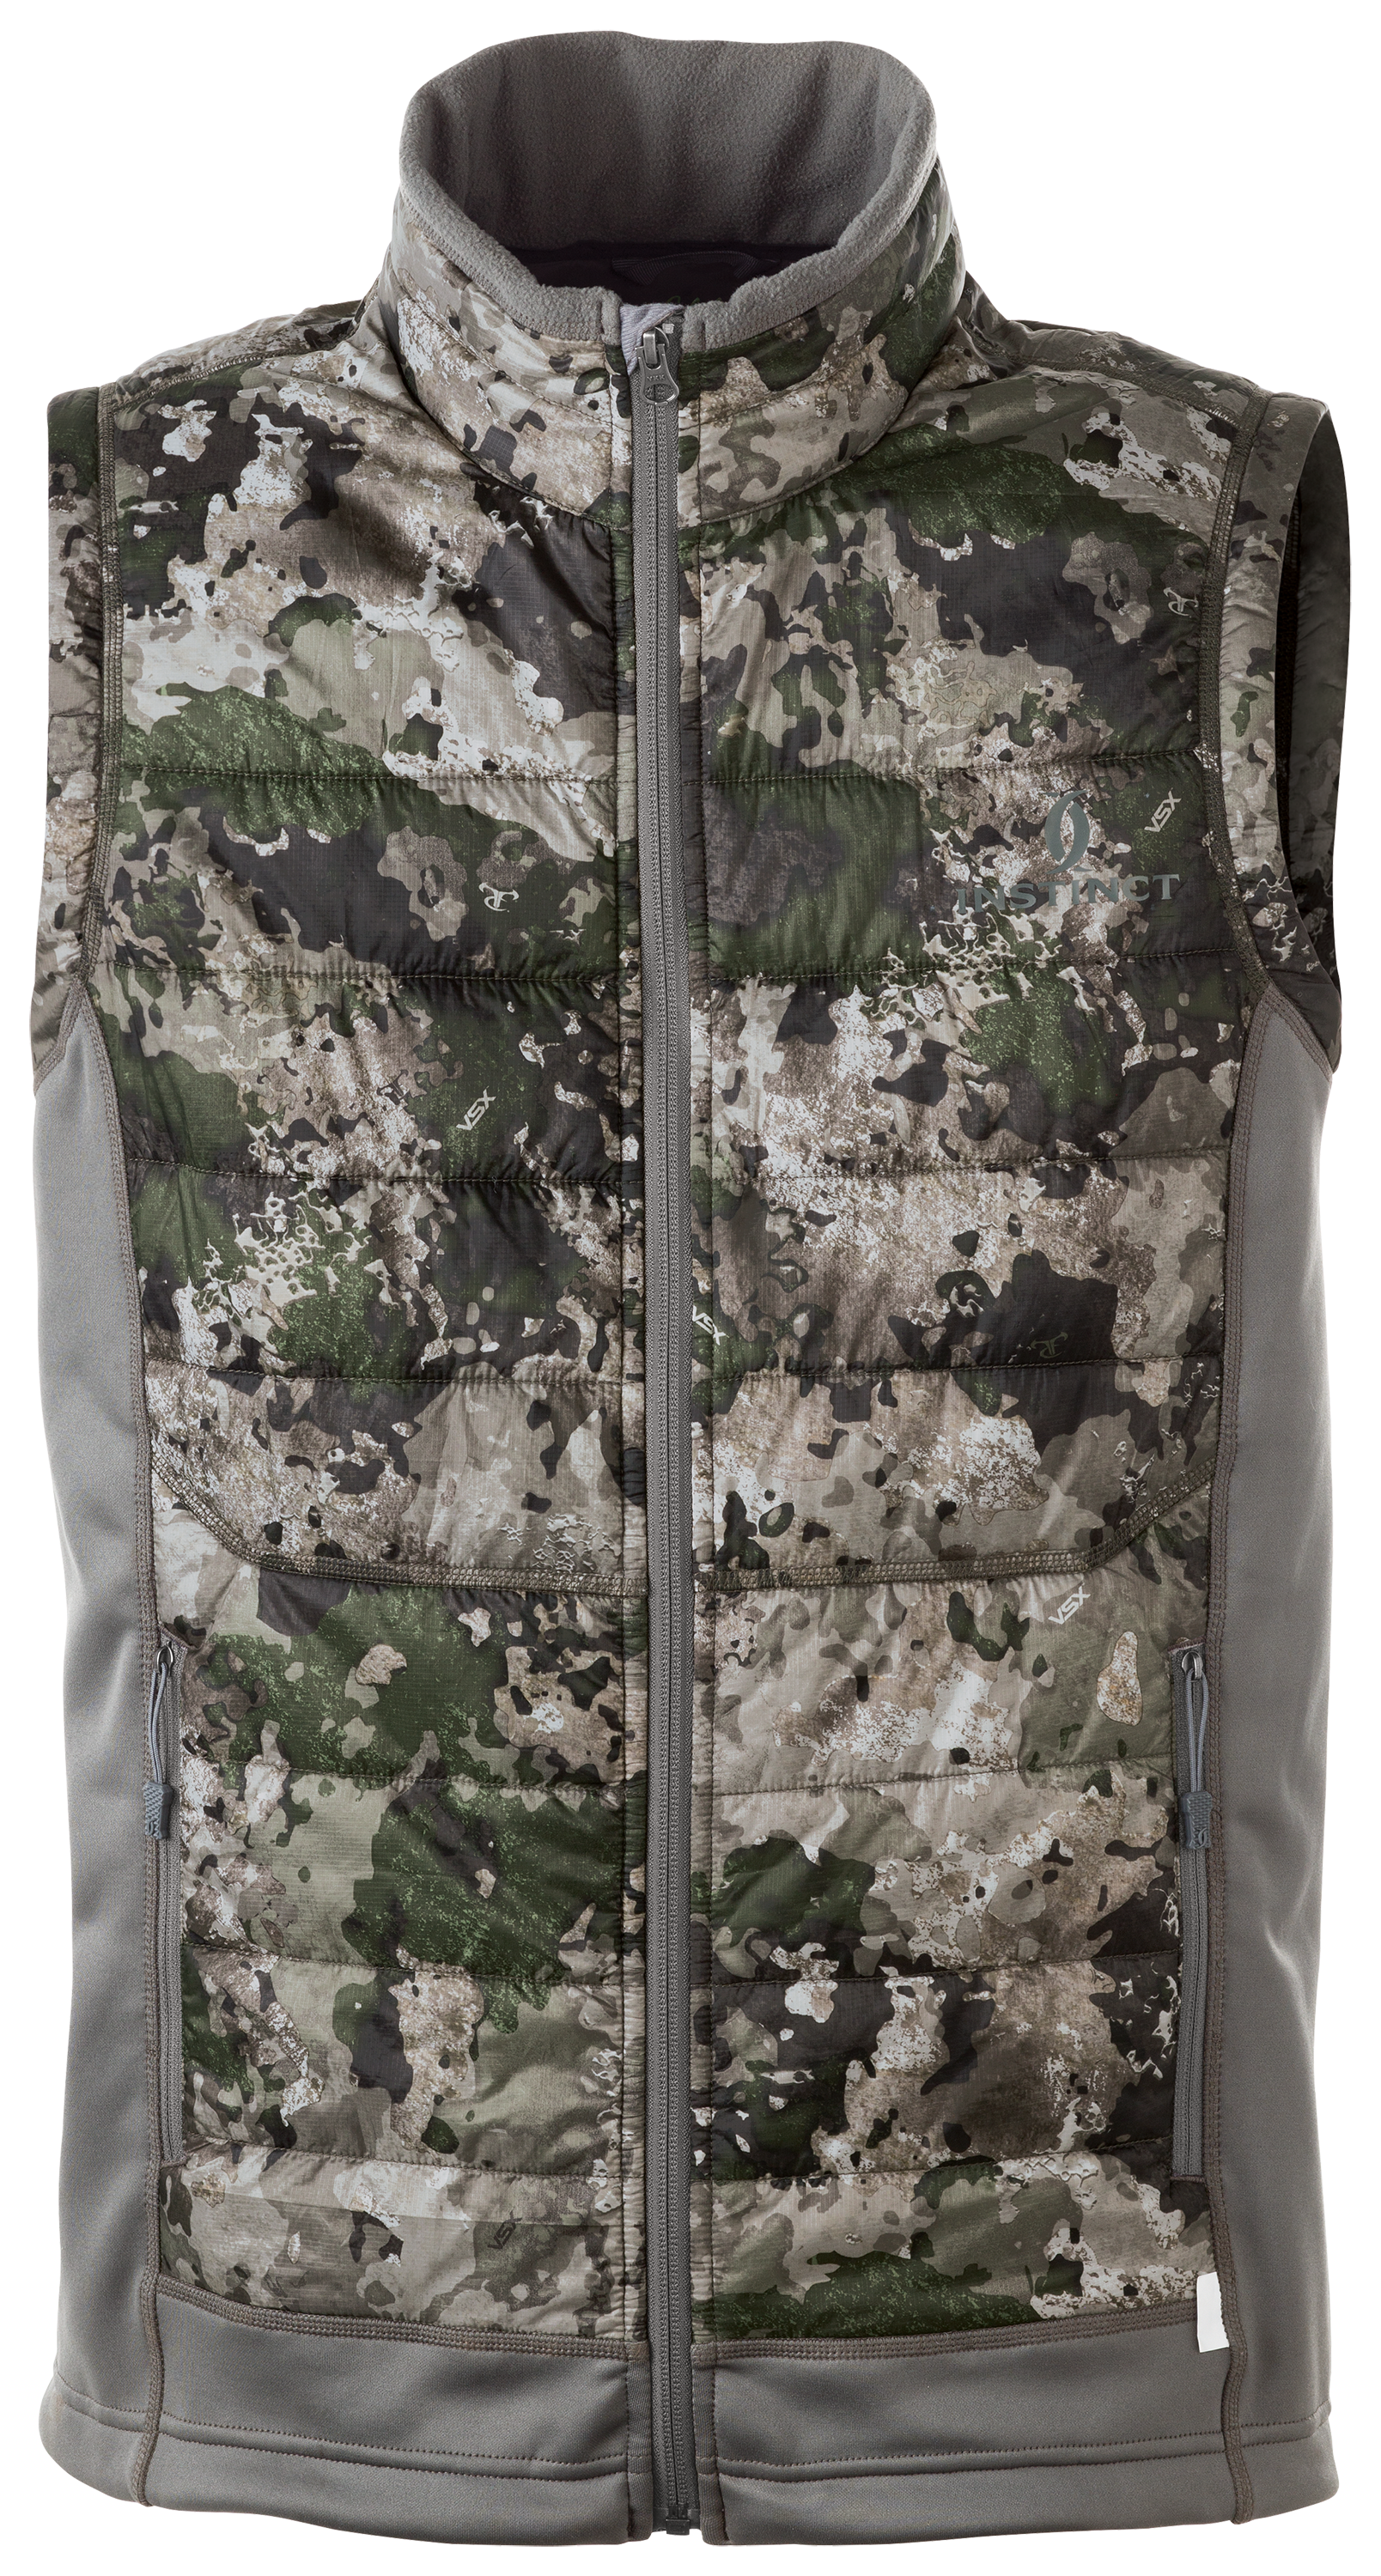 Cabela's Outfitter Series Wooltimate Vest with 4MOST WINDSHEAR